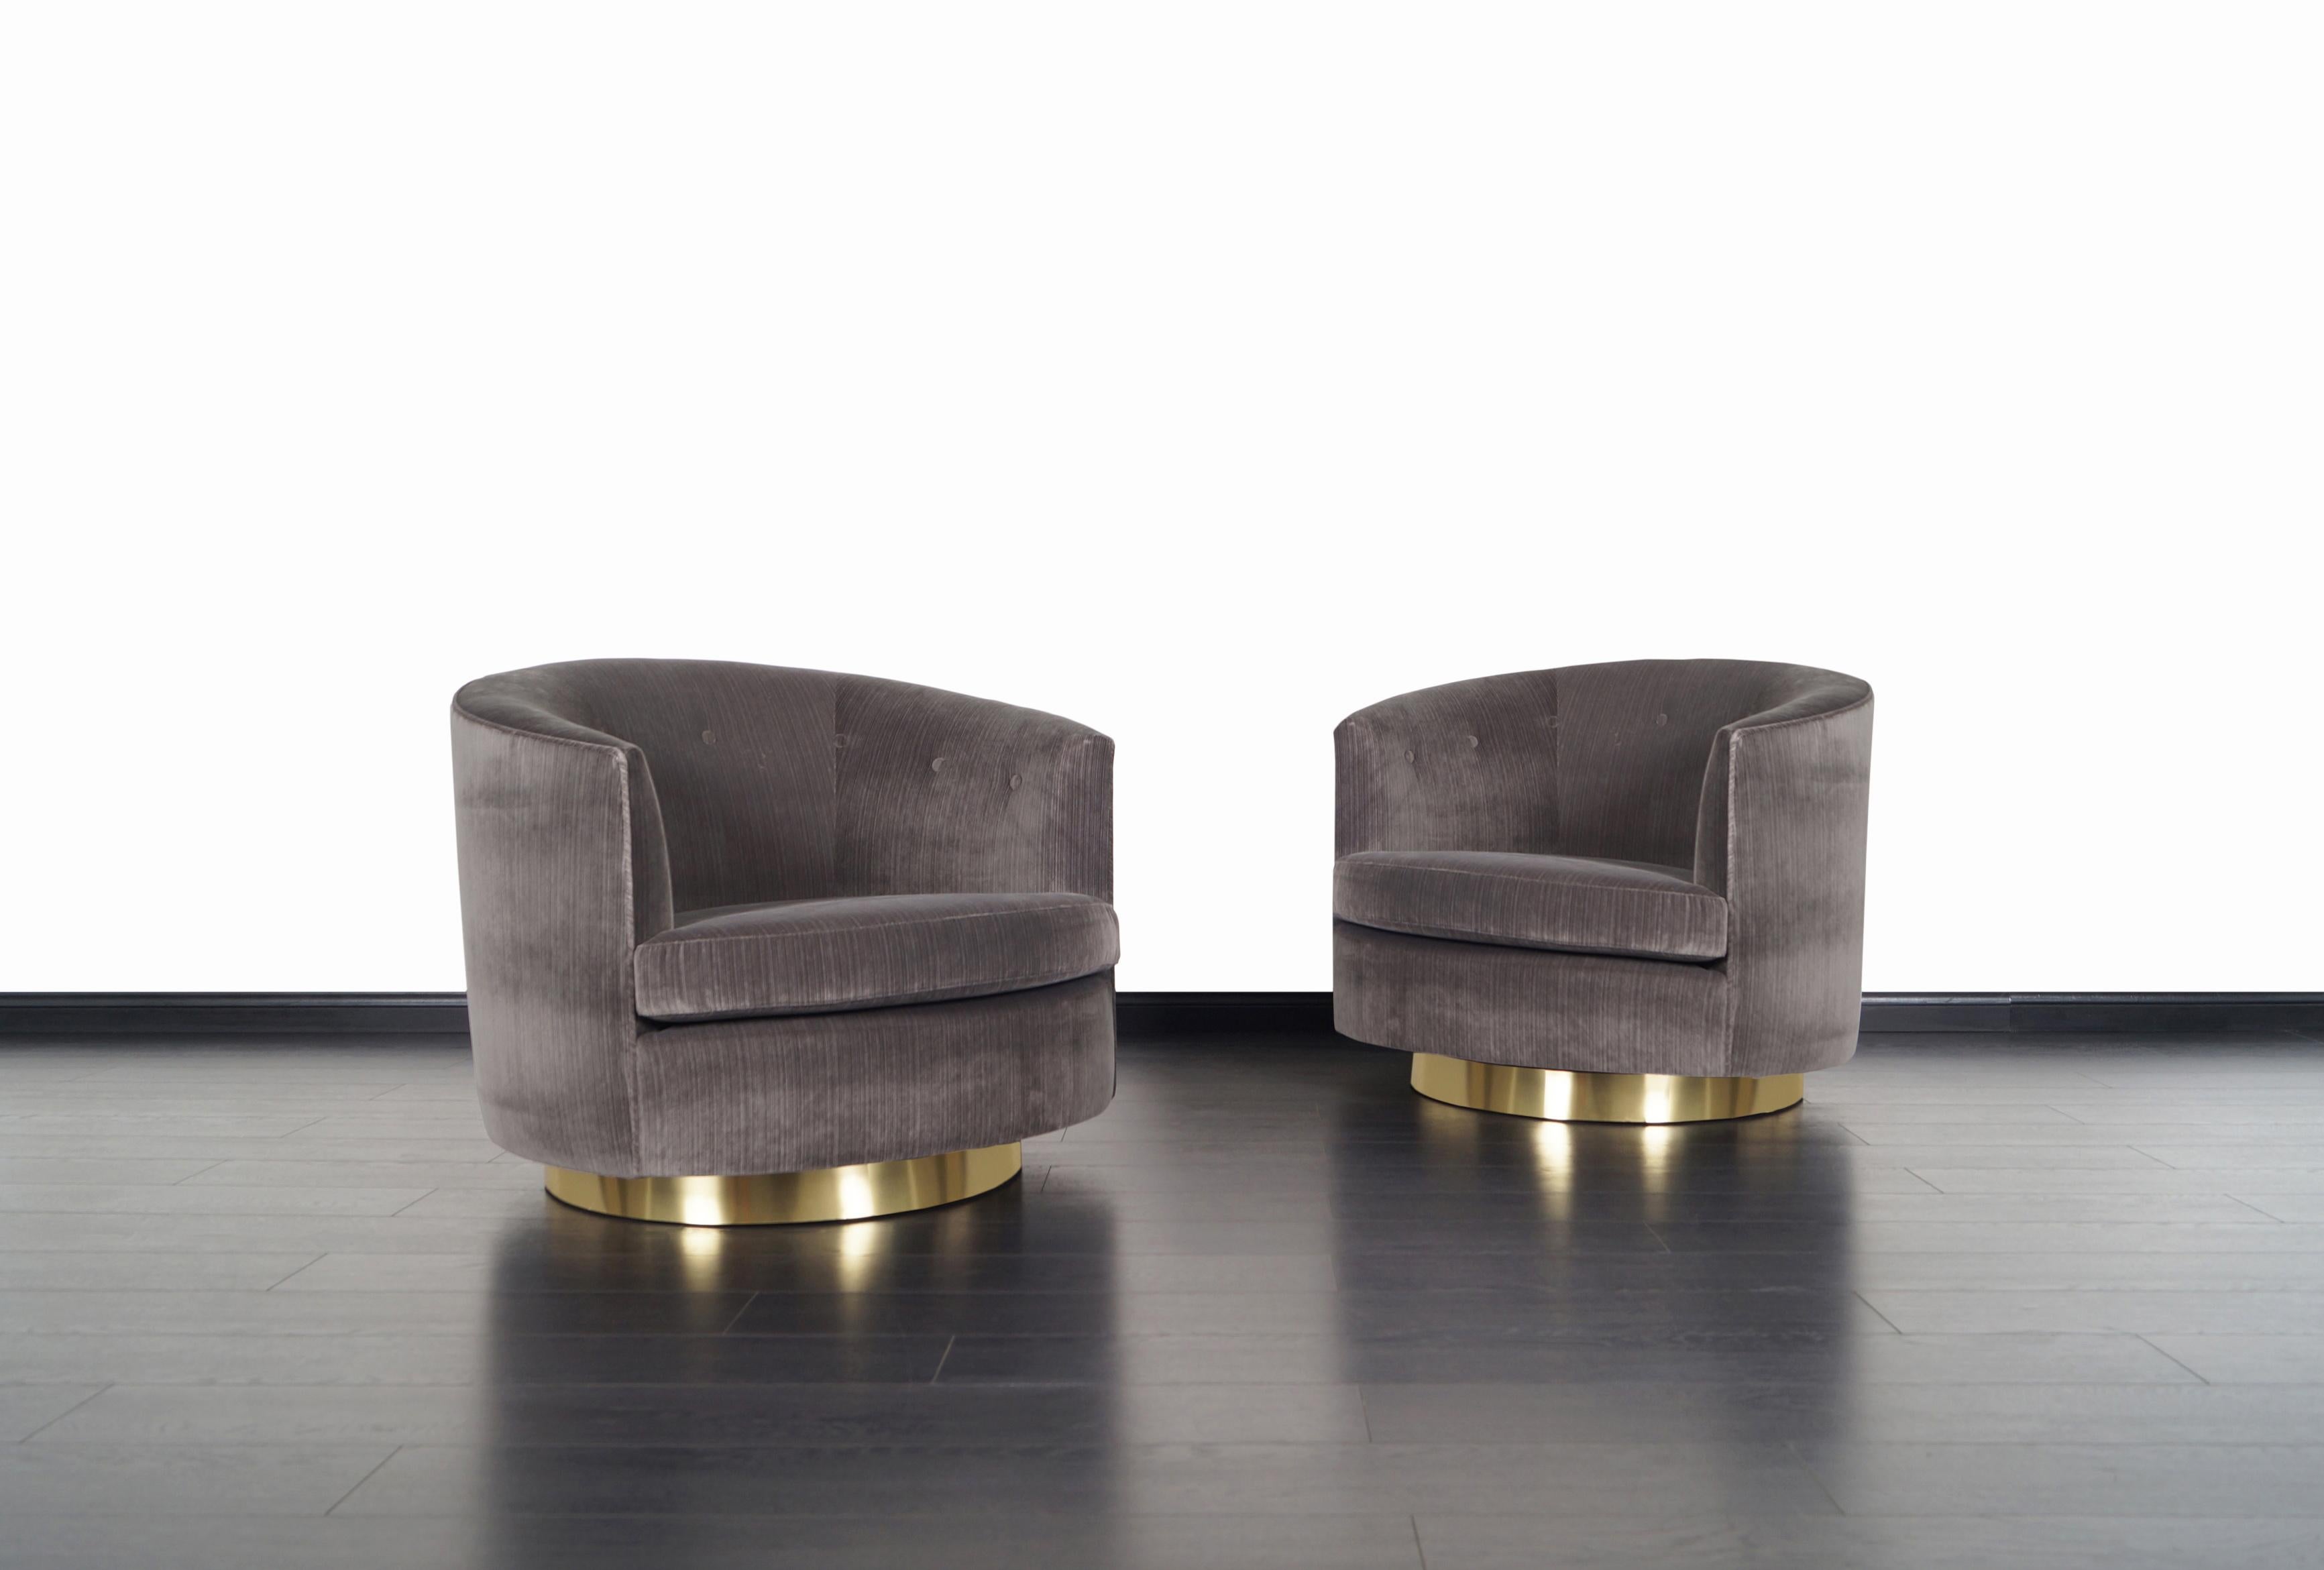 A stunning pair of vintage swivel lounge chairs designed by Milo Baughman for Thayer Coggin. Each chair has a circular brass base that rotates 360 degrees with ease. They're also extremely comfortable. The chairs have been professionally